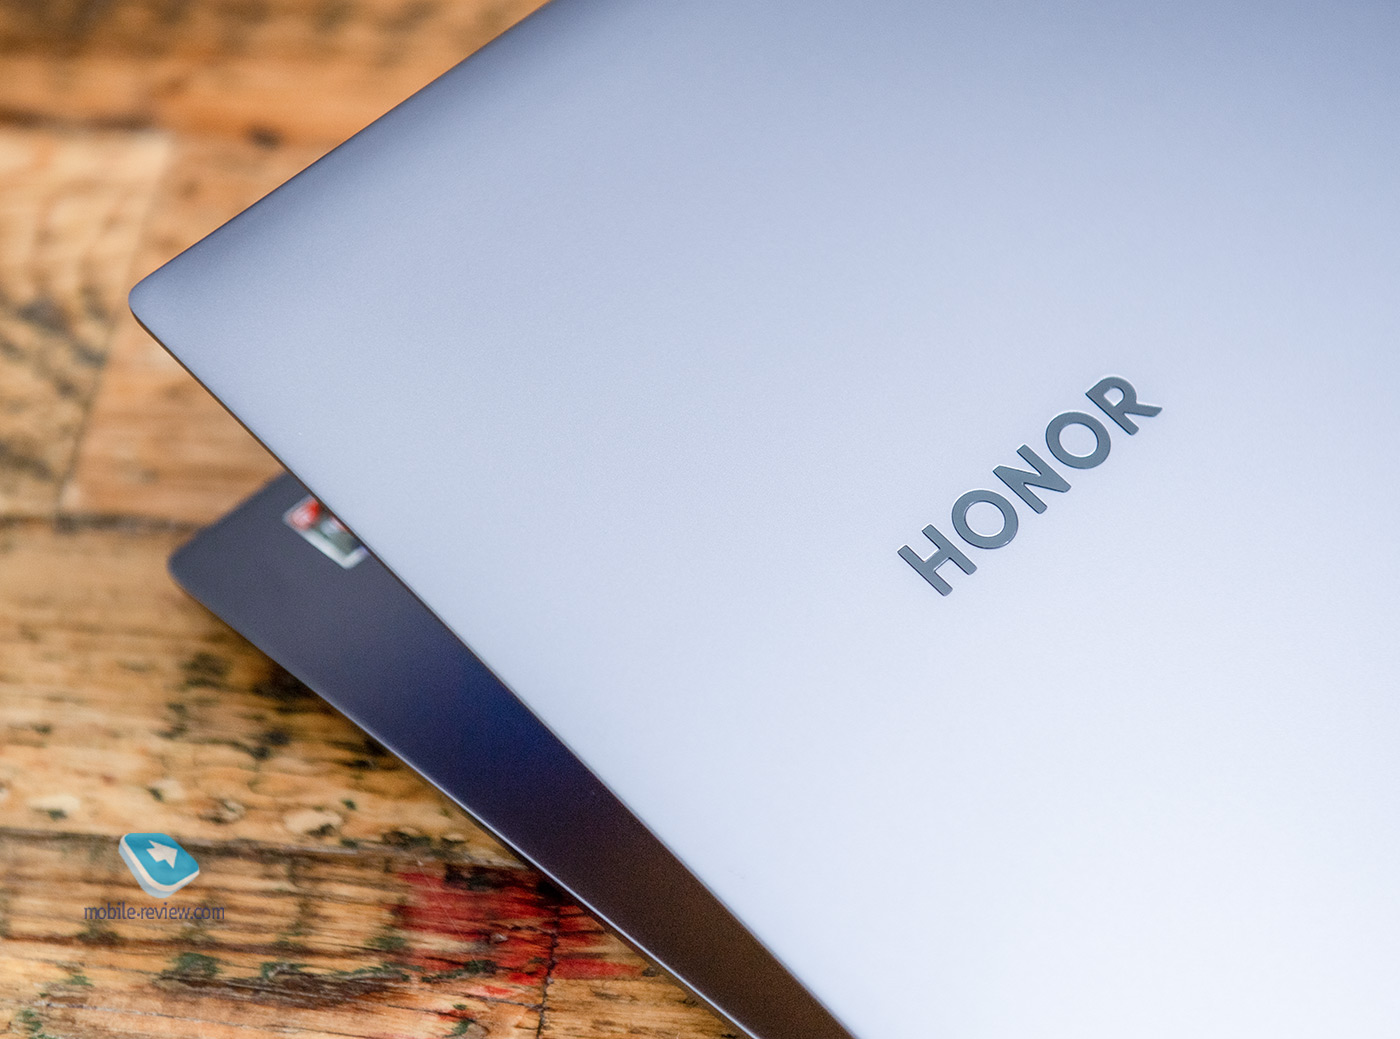 Honor magicbook x 16 pro 7840hs. Honor MAGICBOOK 16 Pro. Honor MAGICBOOK Pro 16.1. 16.1" Ноутбук Honor MAGICBOOK Pro. Honor MAGICBOOK 16 Pro 2021.